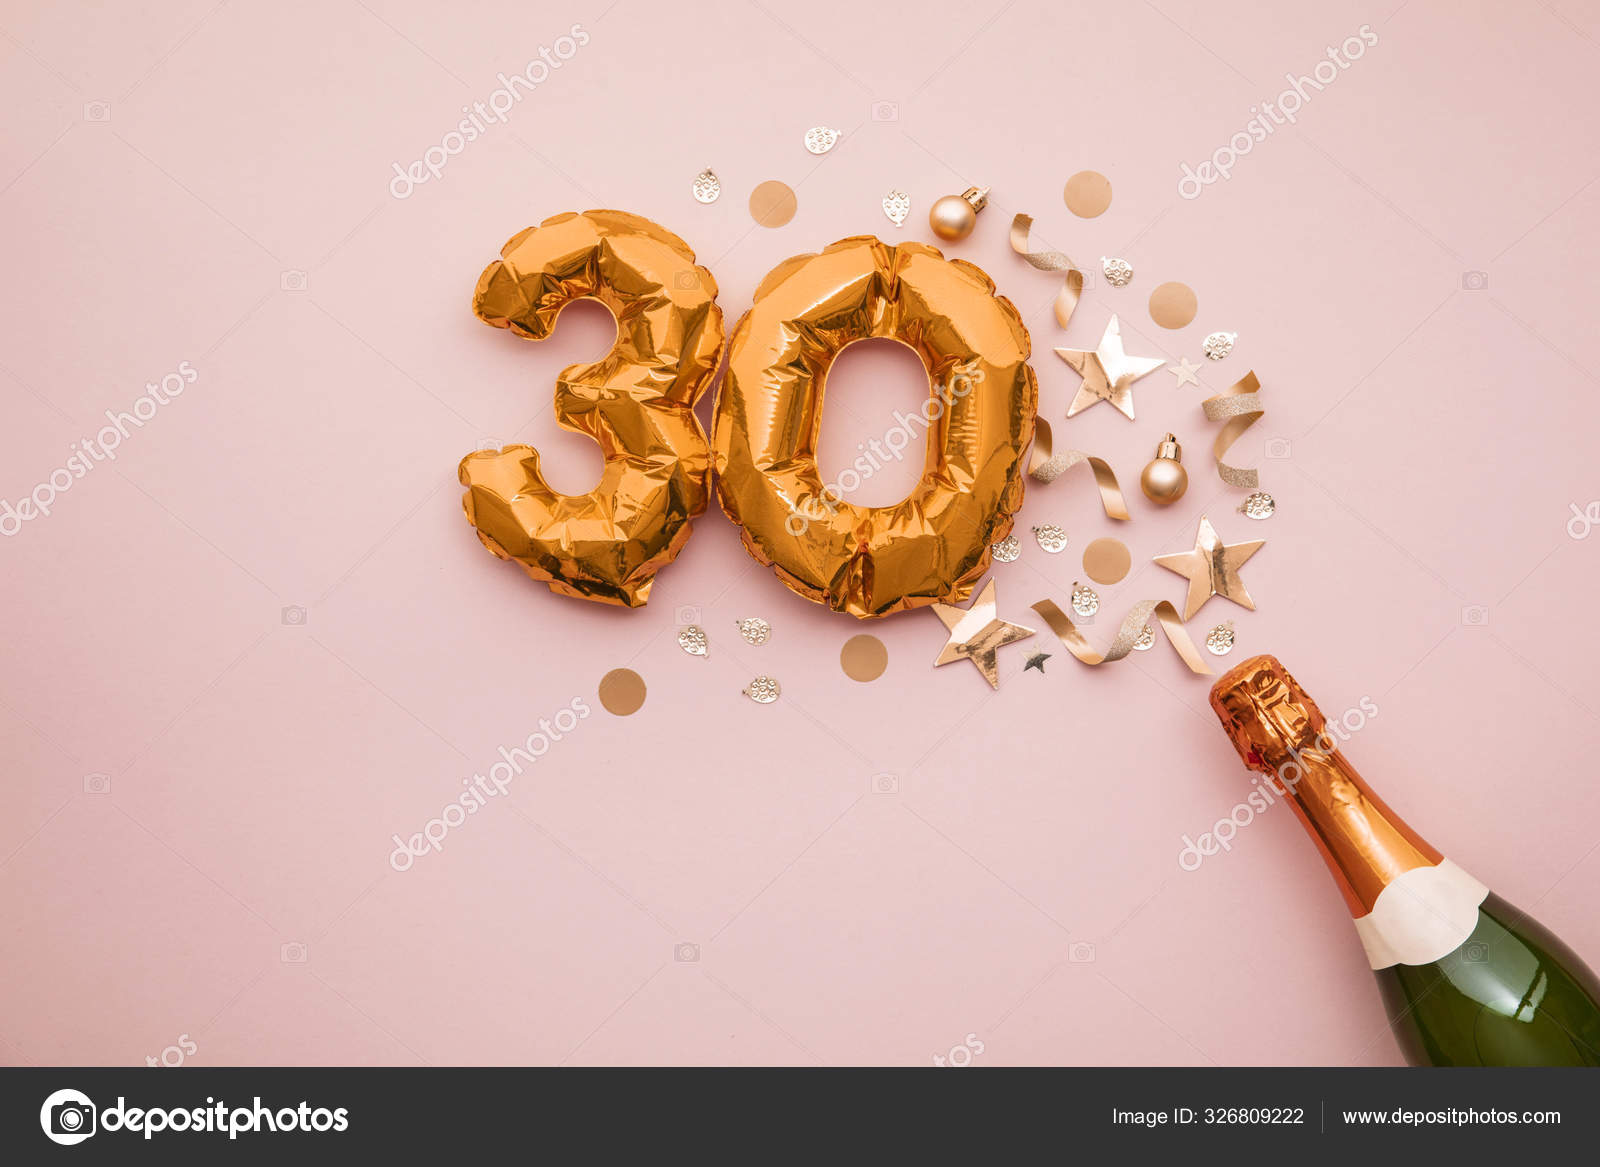 depositphotos 326809222 stock photo happy 30th anniversary party champagne